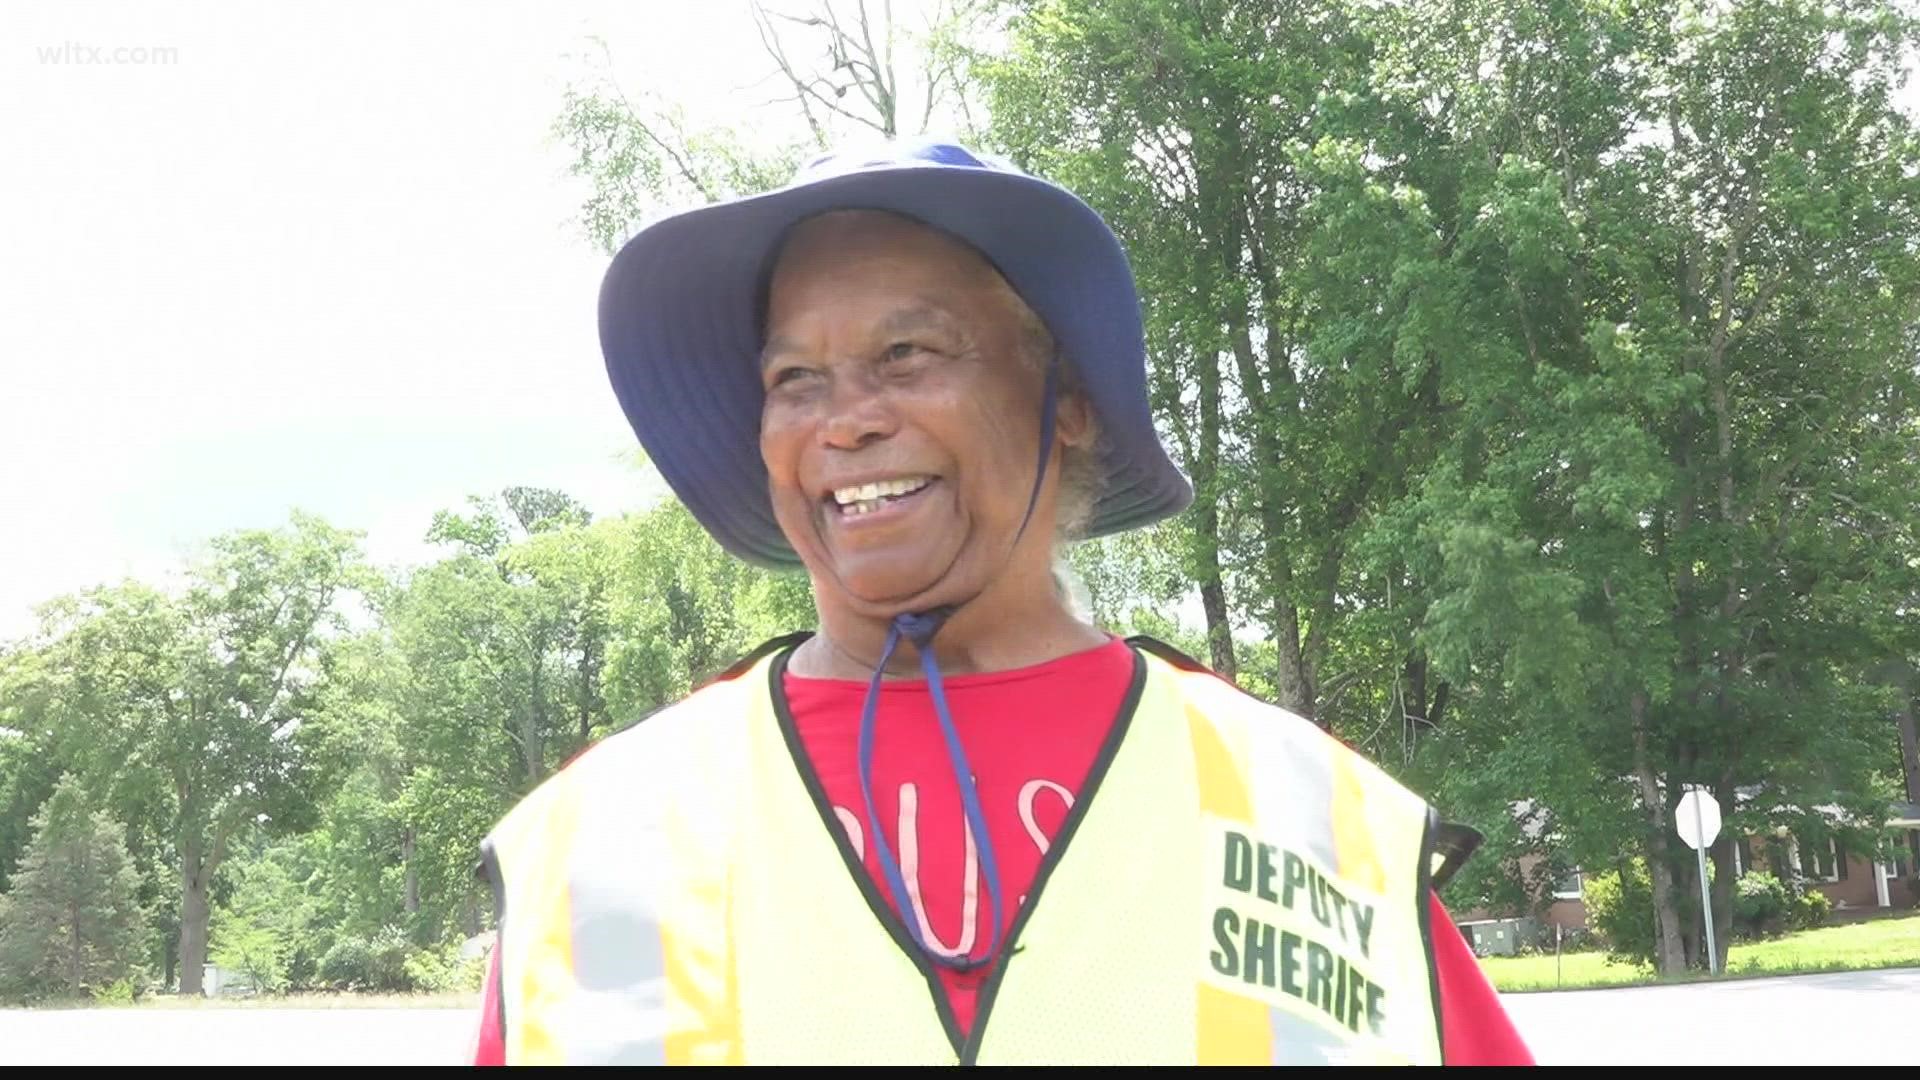 Martha Scott has been a crossing guard at Lugoff Elementary for 21 years.